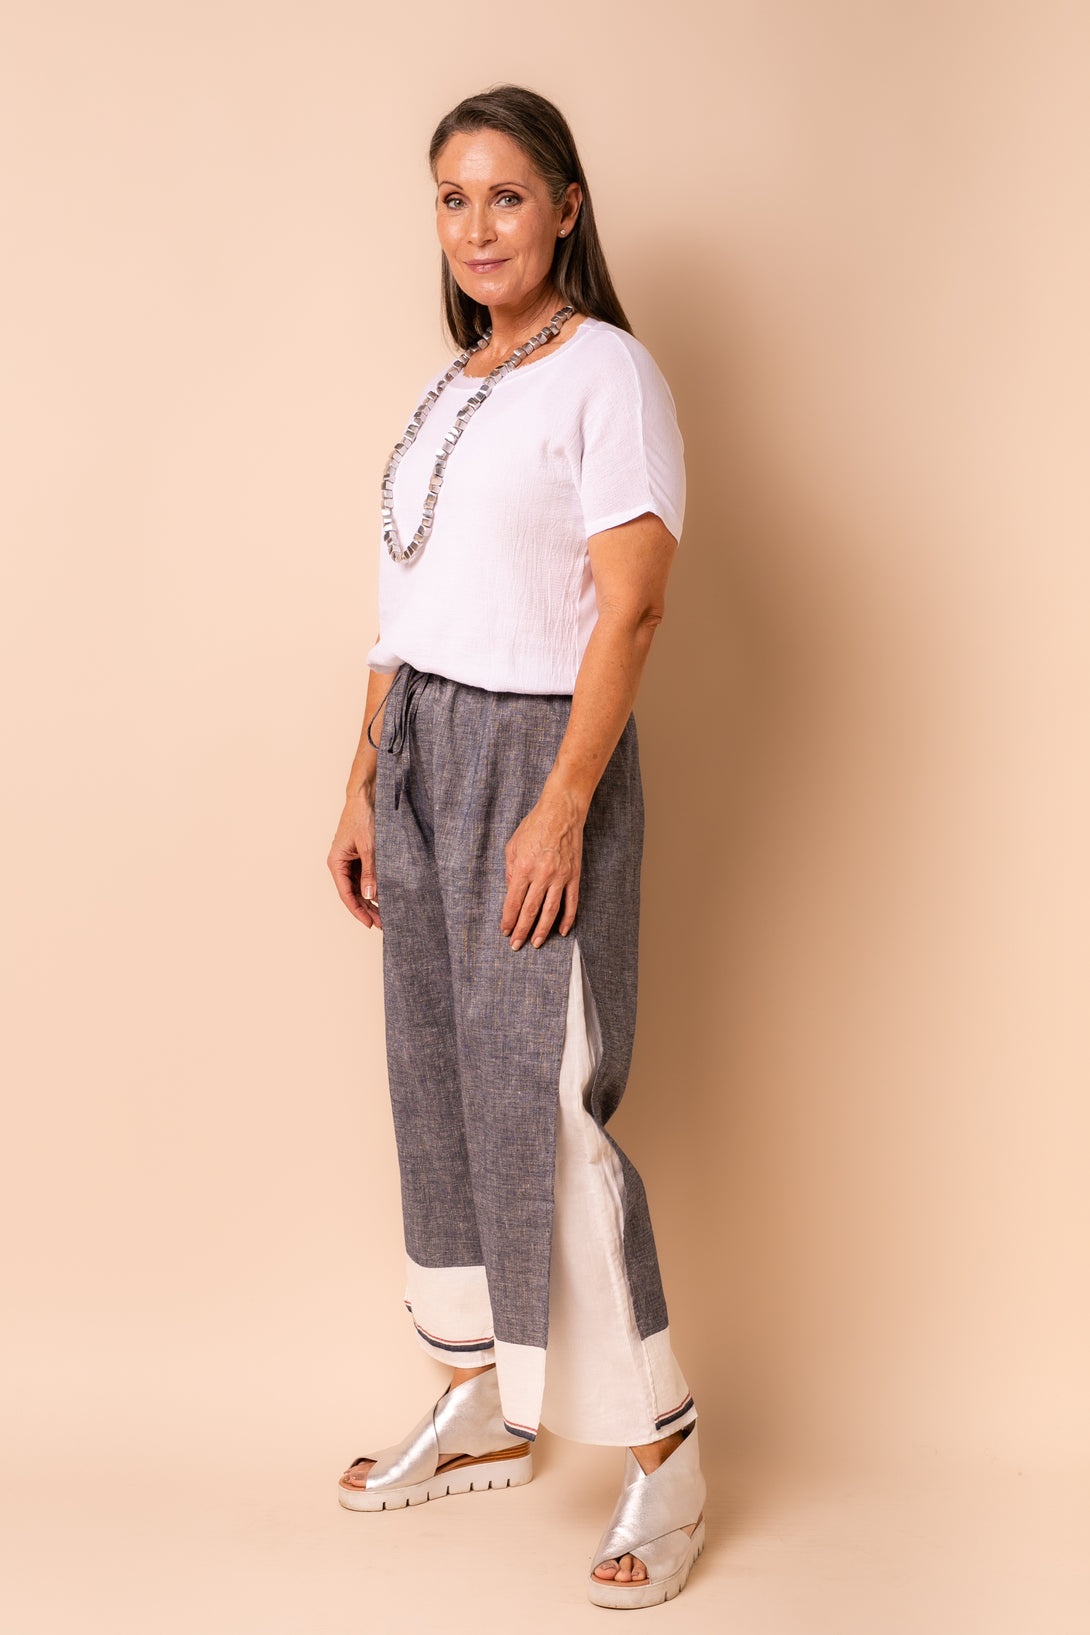 Polly Linen Blend Pants in Navy - Imagine Fashion